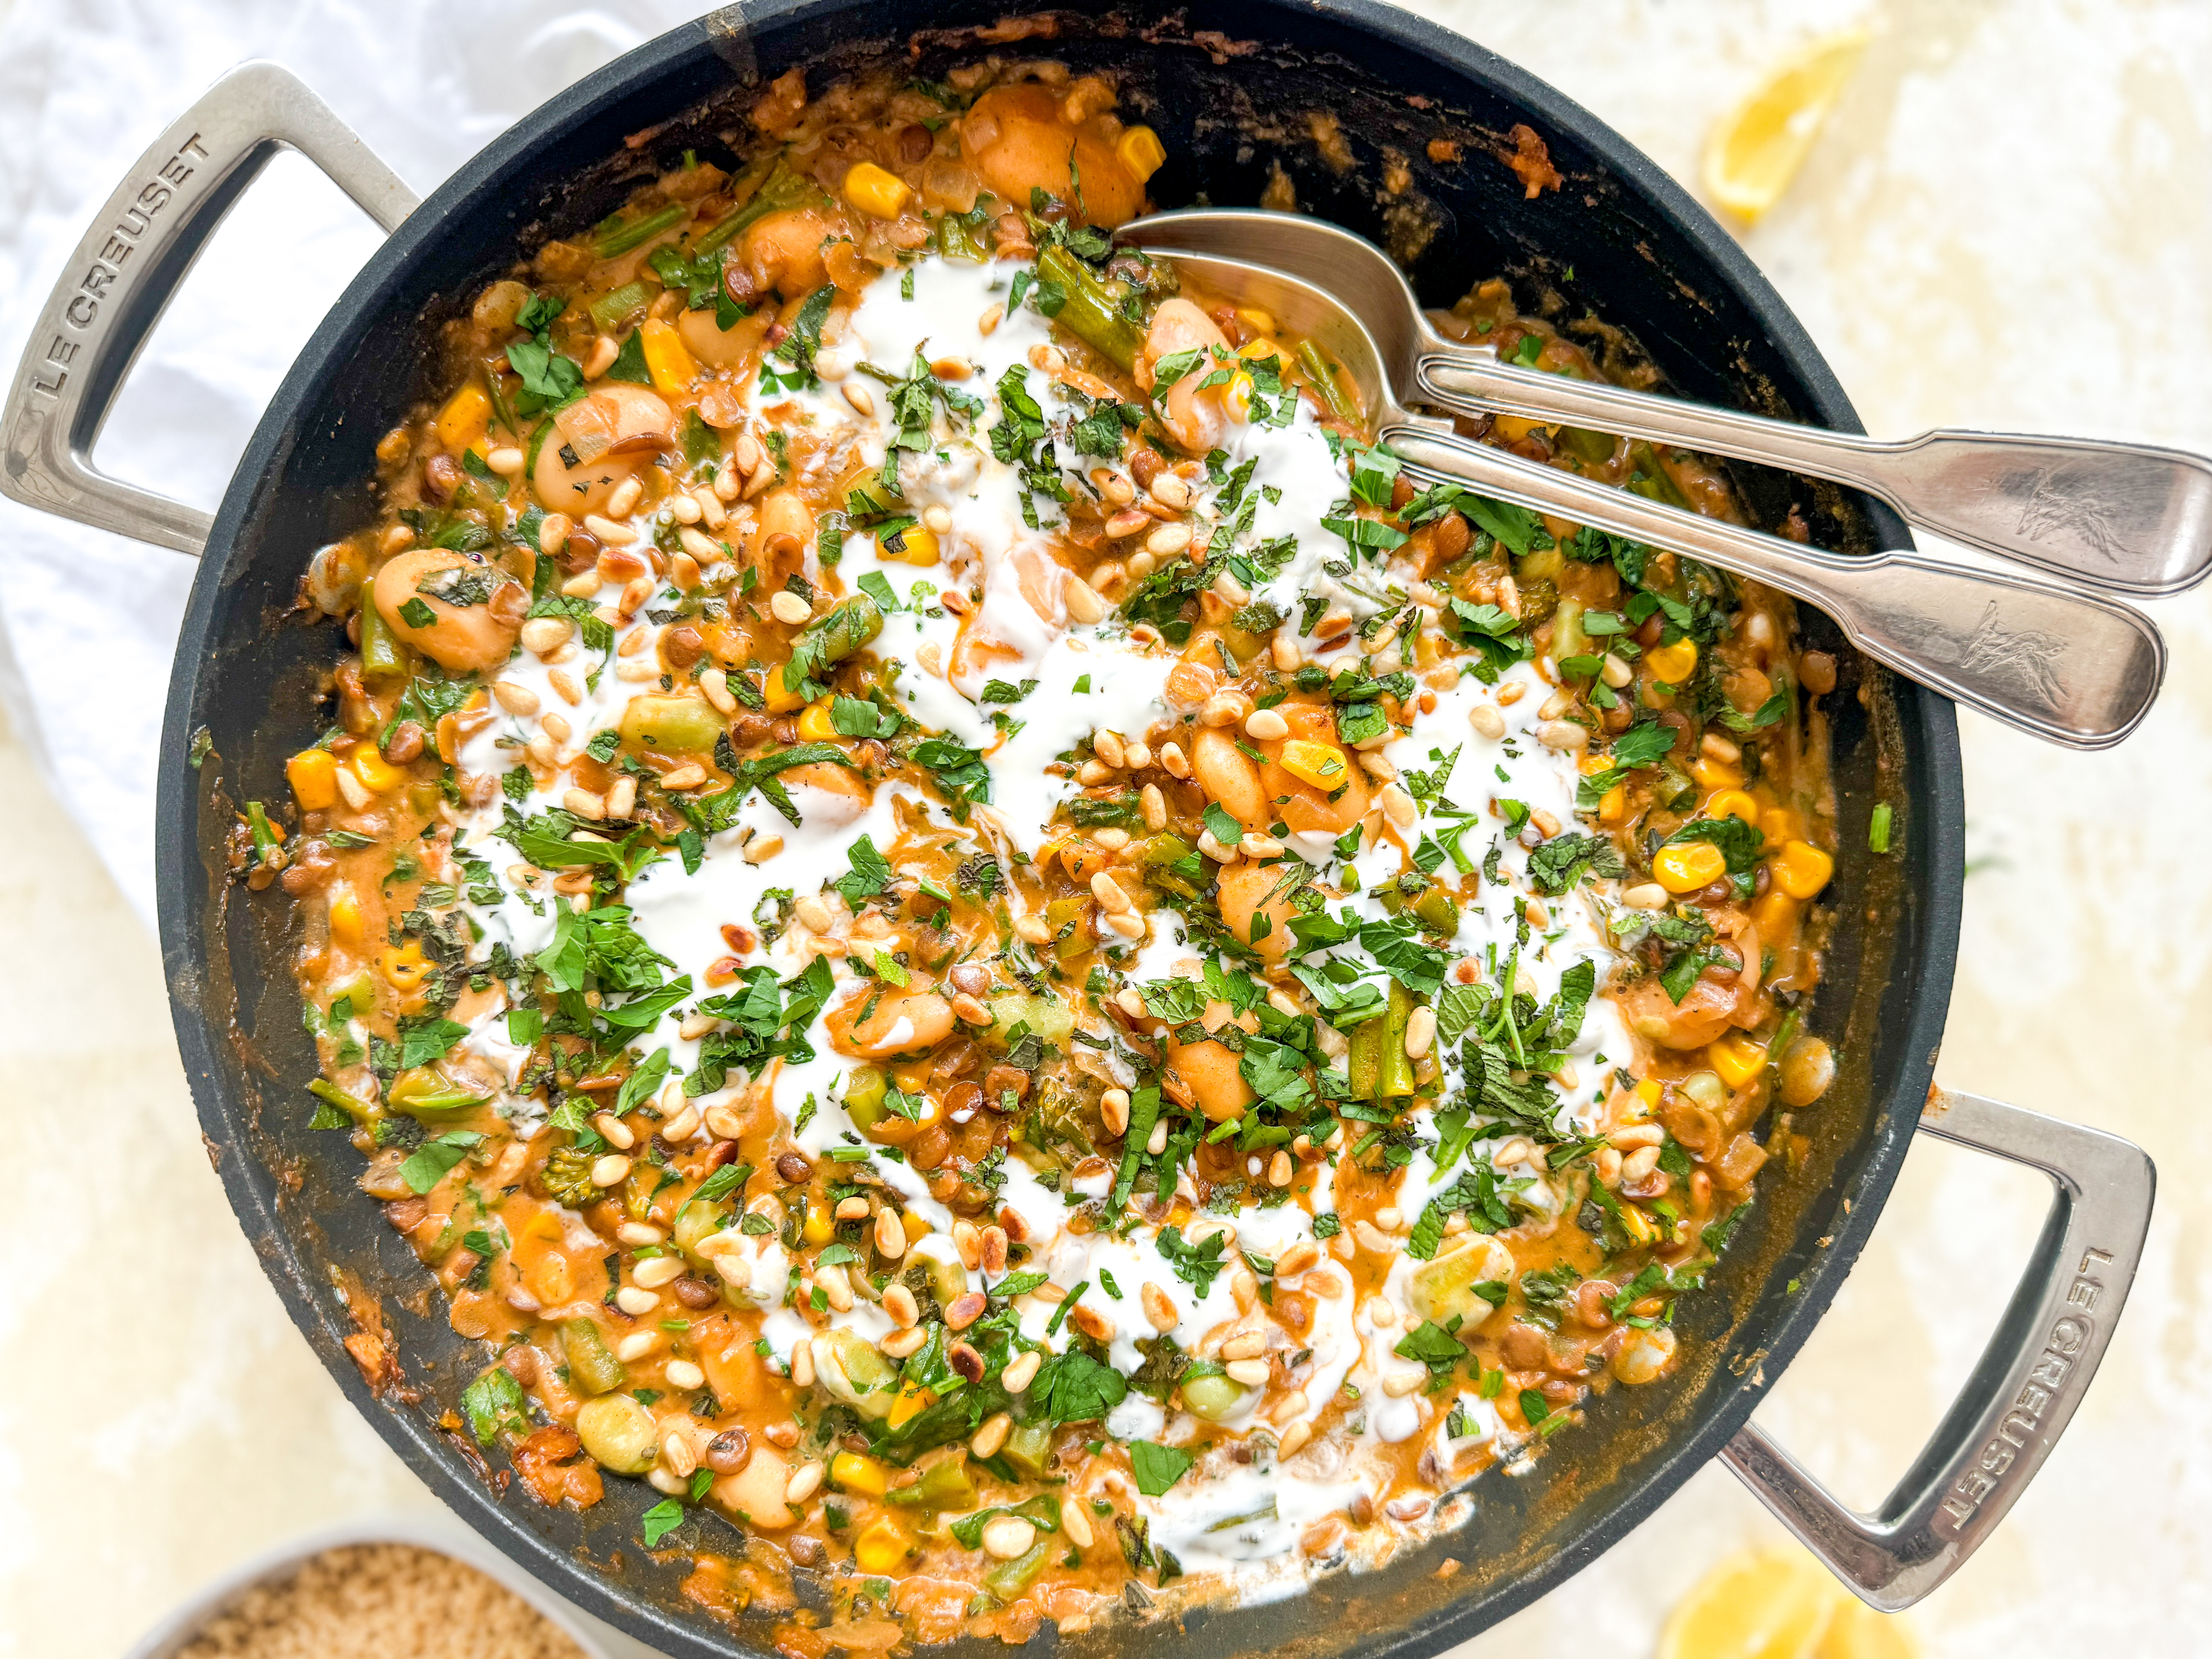 Photograph of Middle Eastern inspired Butter Bean and Vegetable Stew with Parsley and Mint